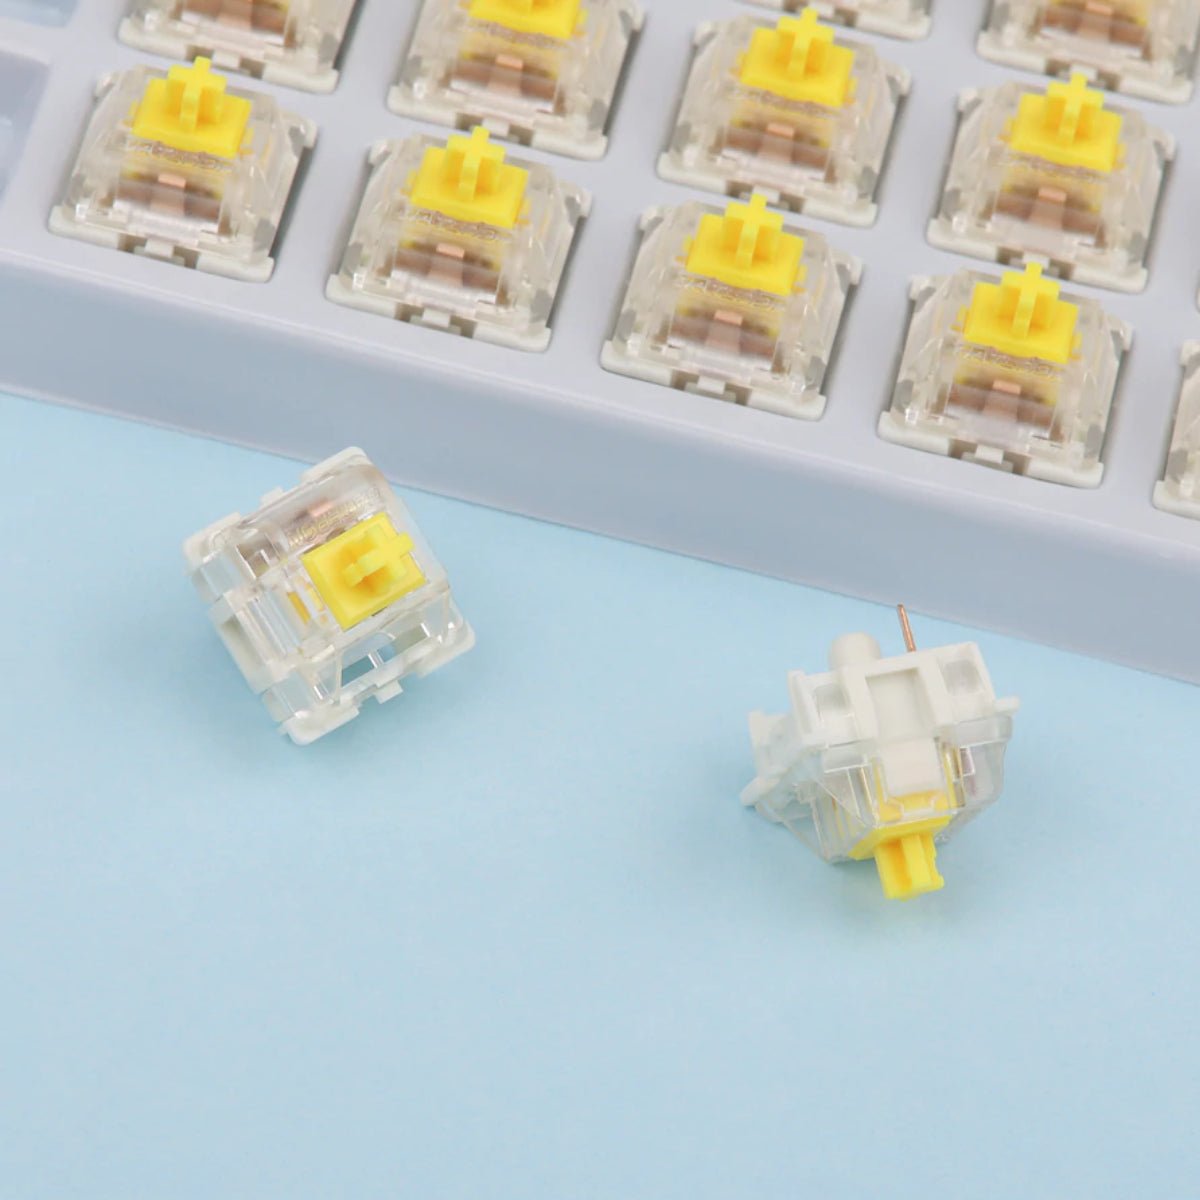 KBD Fans Gateron Pro Pre-Lubed Linear Switches - Yellow - Store 974 | ستور ٩٧٤